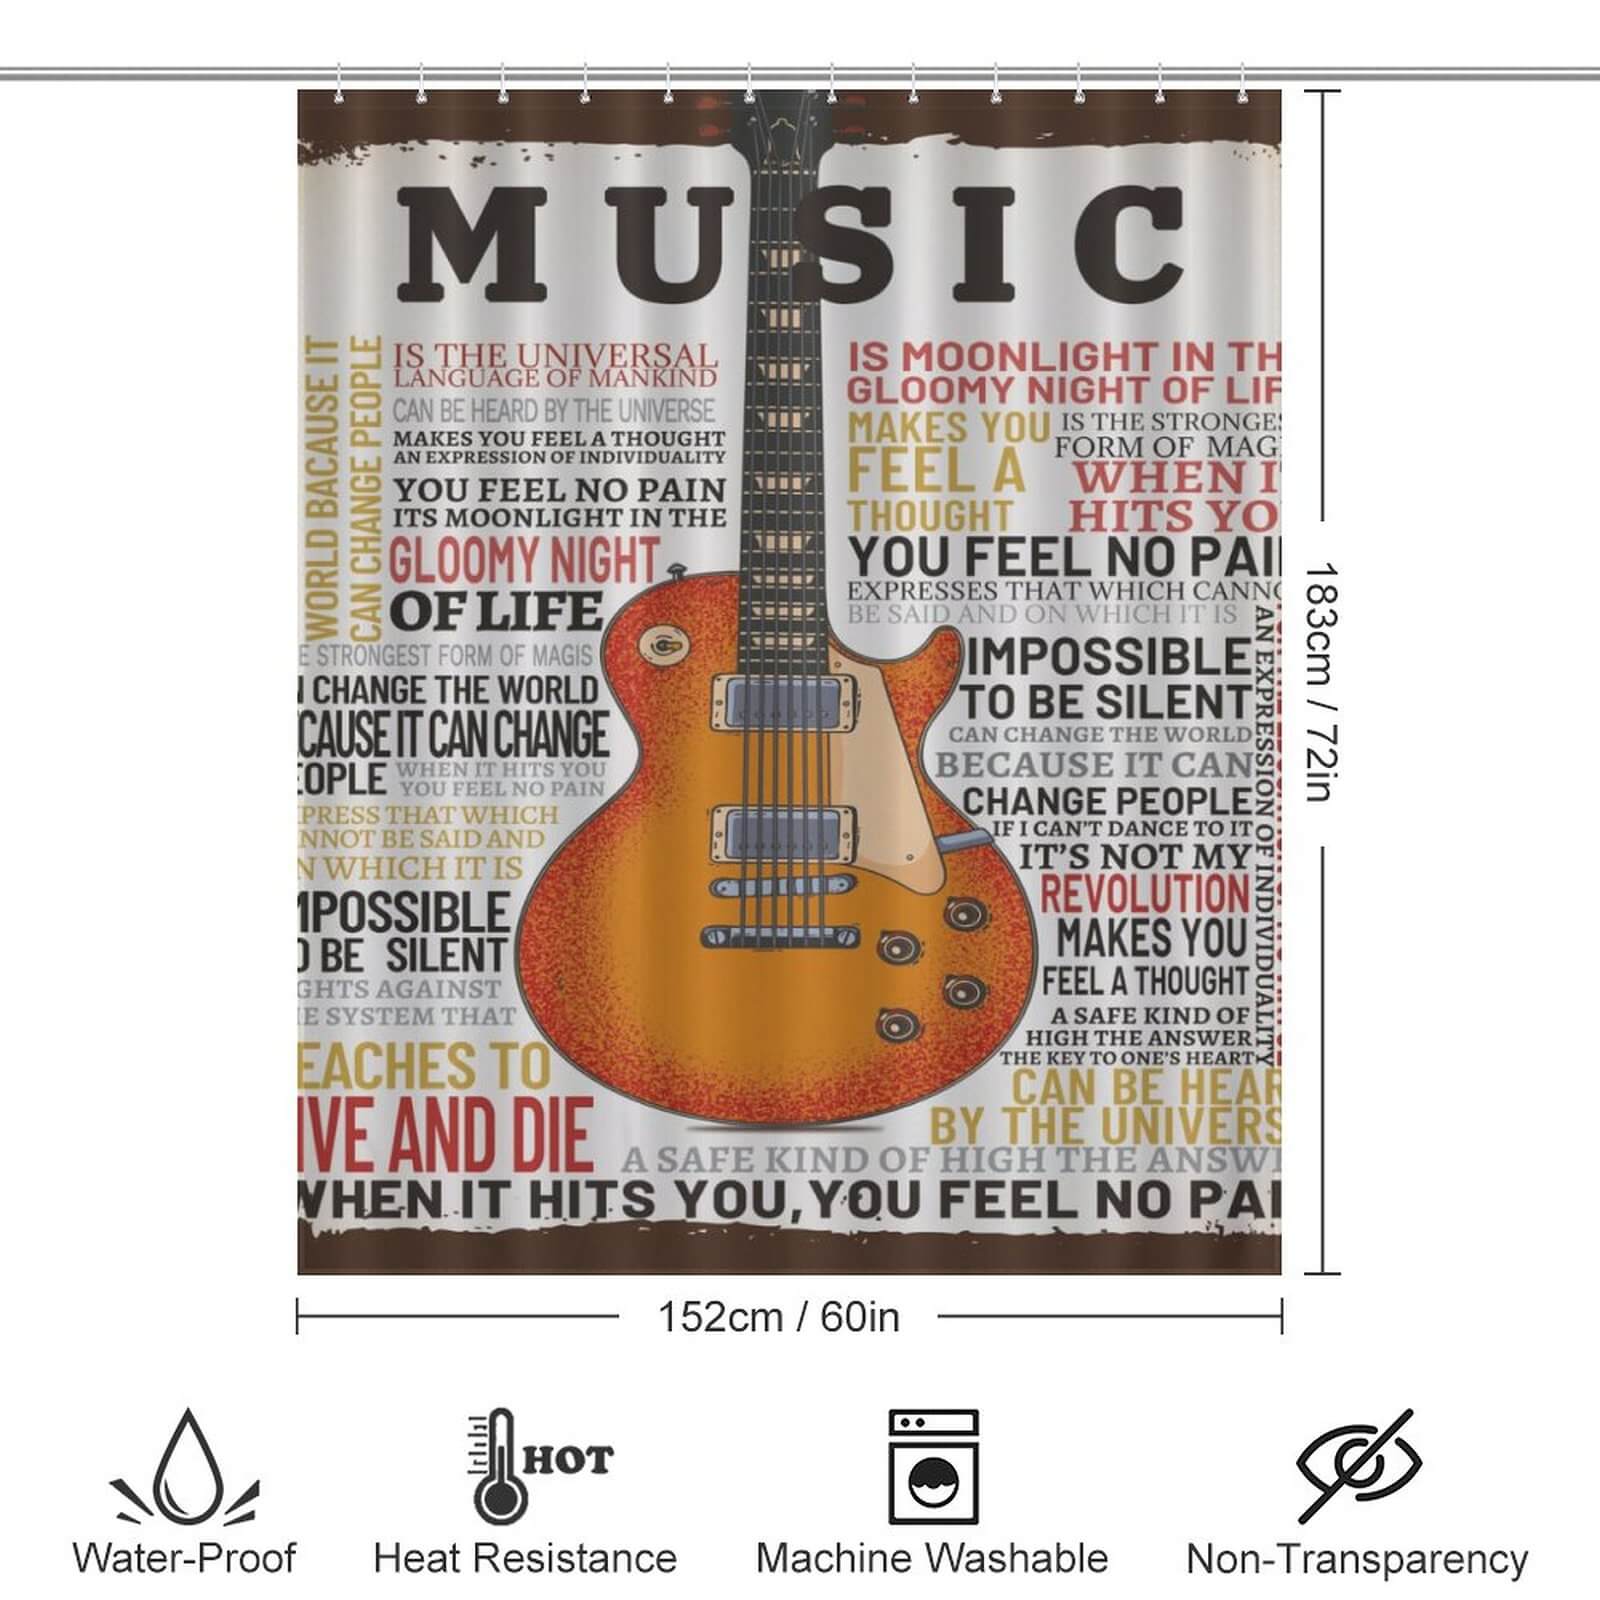 A Music Inspires Me Shower Curtain by Cotton Cat, decorated with a guitar, perfect for adding music-themed charm to your bathroom decor.